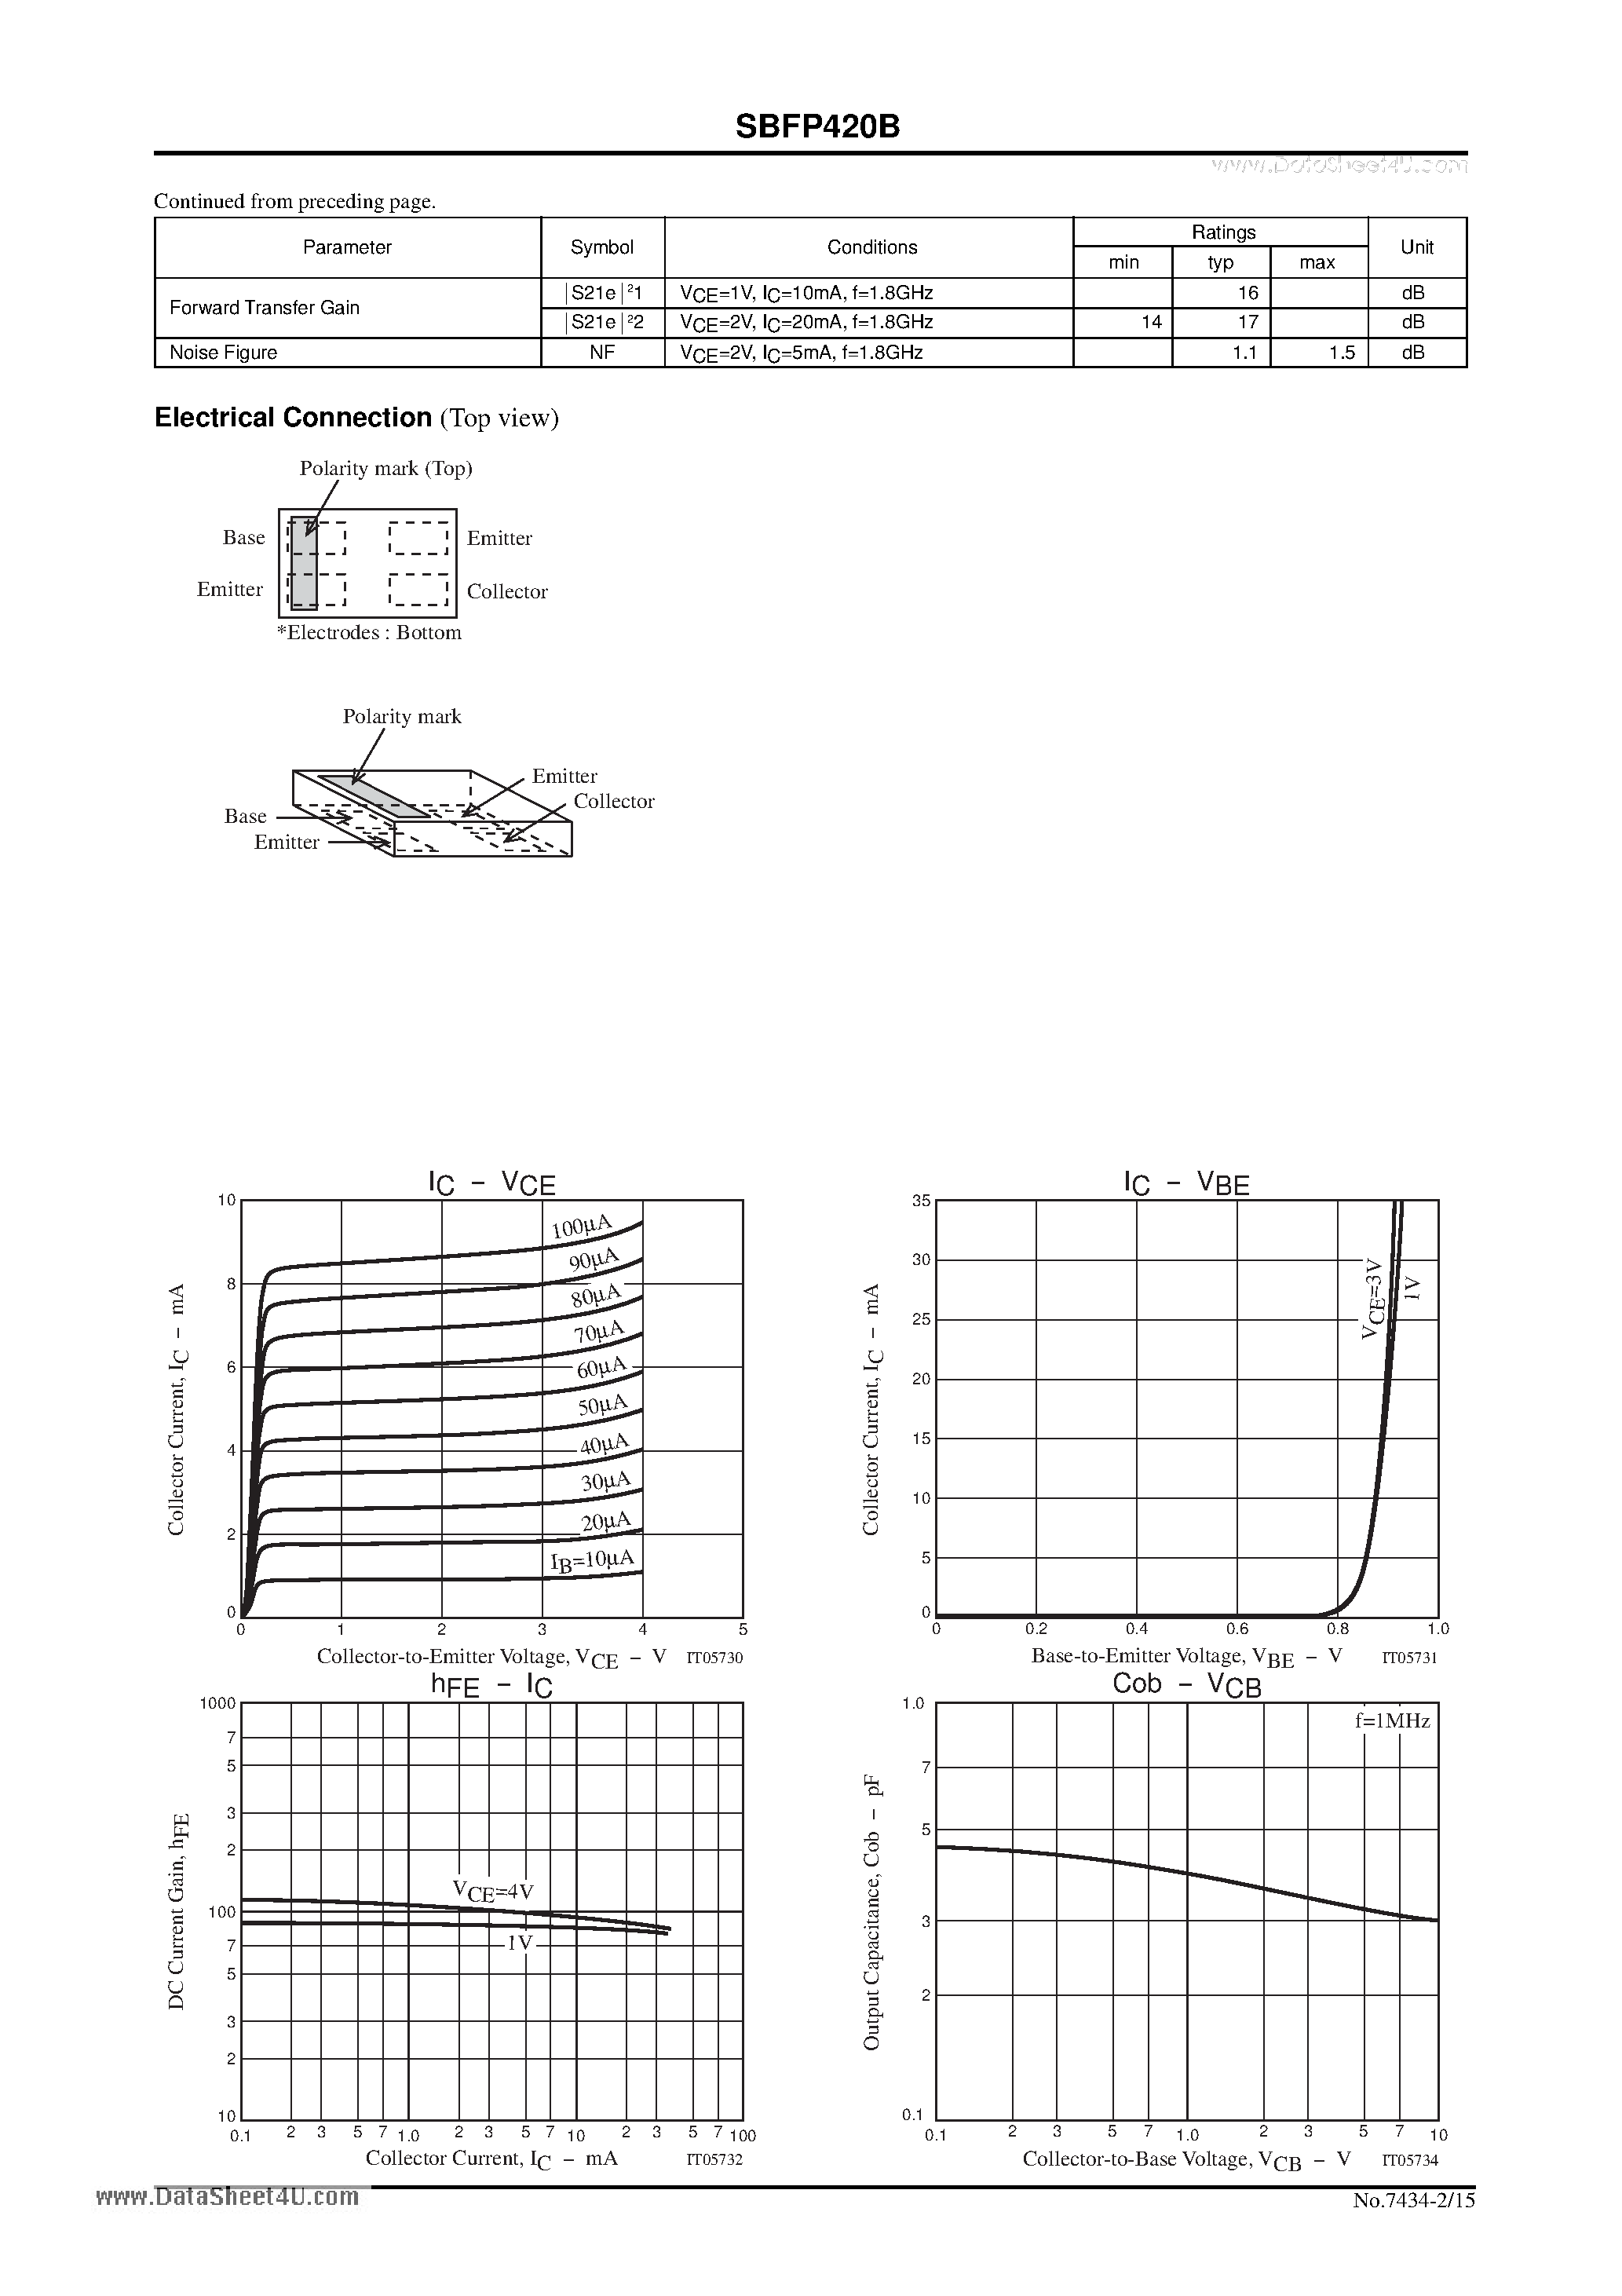 Datasheet SBFP420B - UHF to C Band Low Noise Amplifier Oscillation Applications page 2